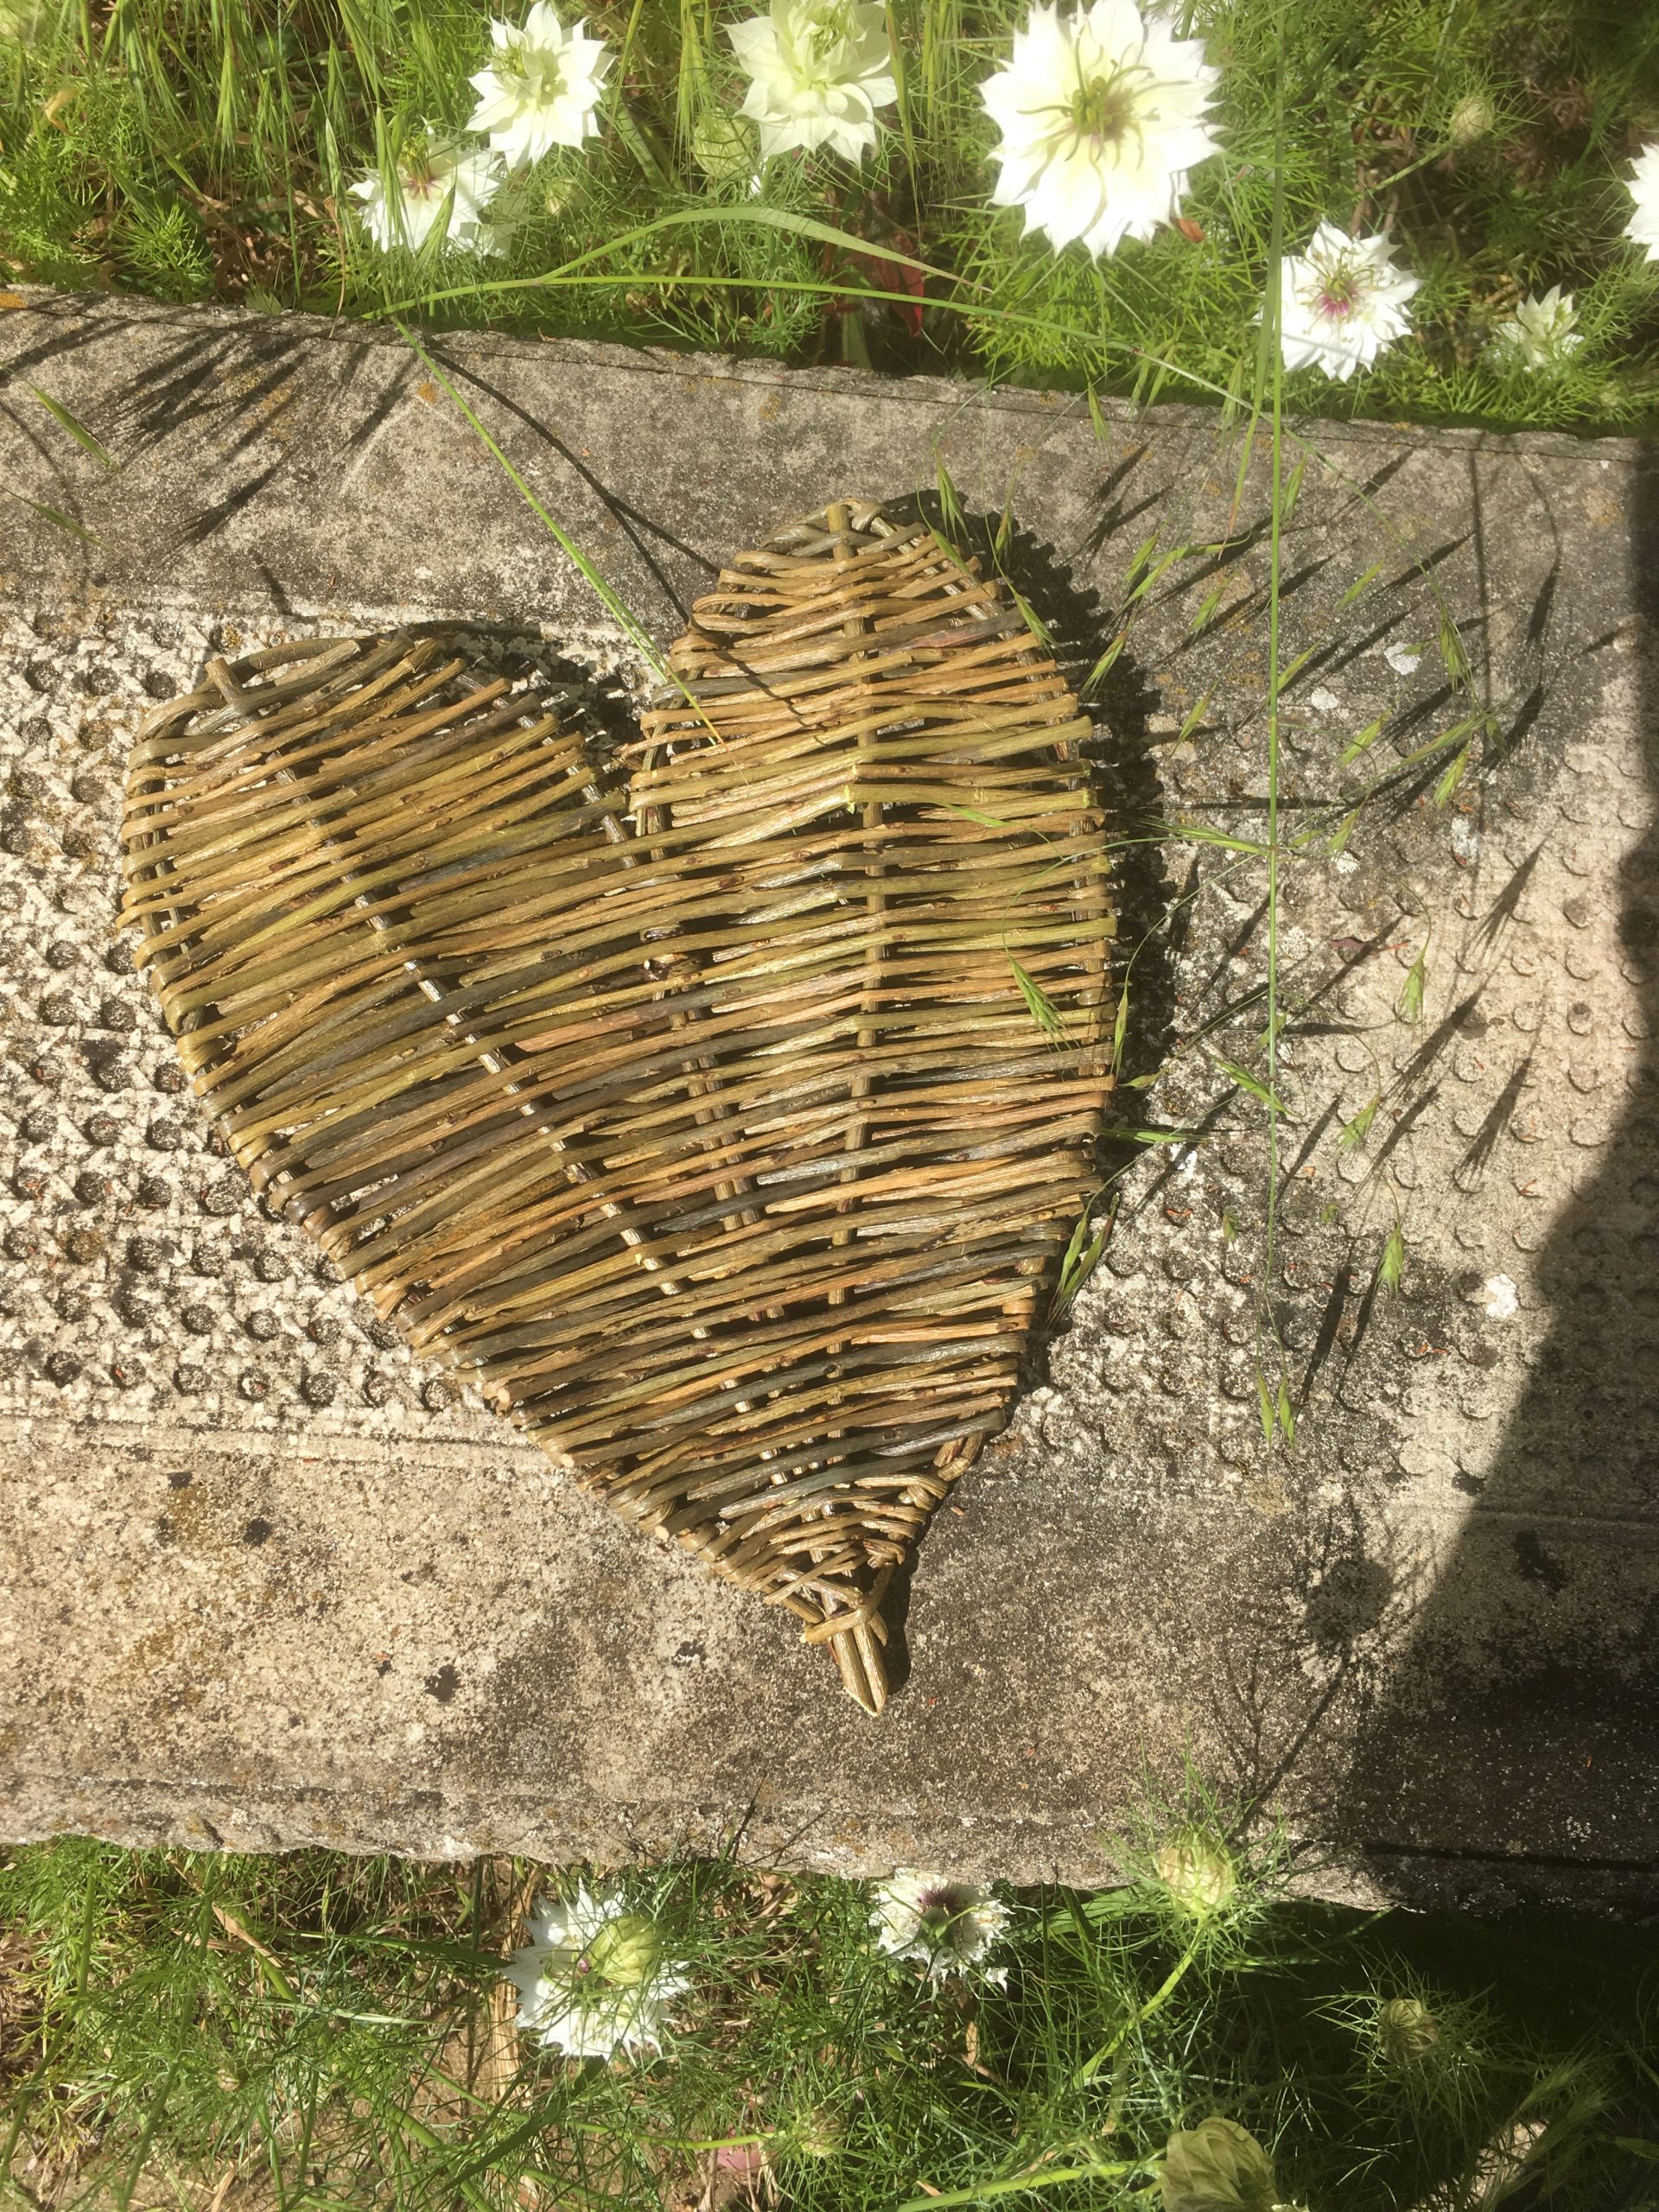 Woven willow heart at Willows Nursery